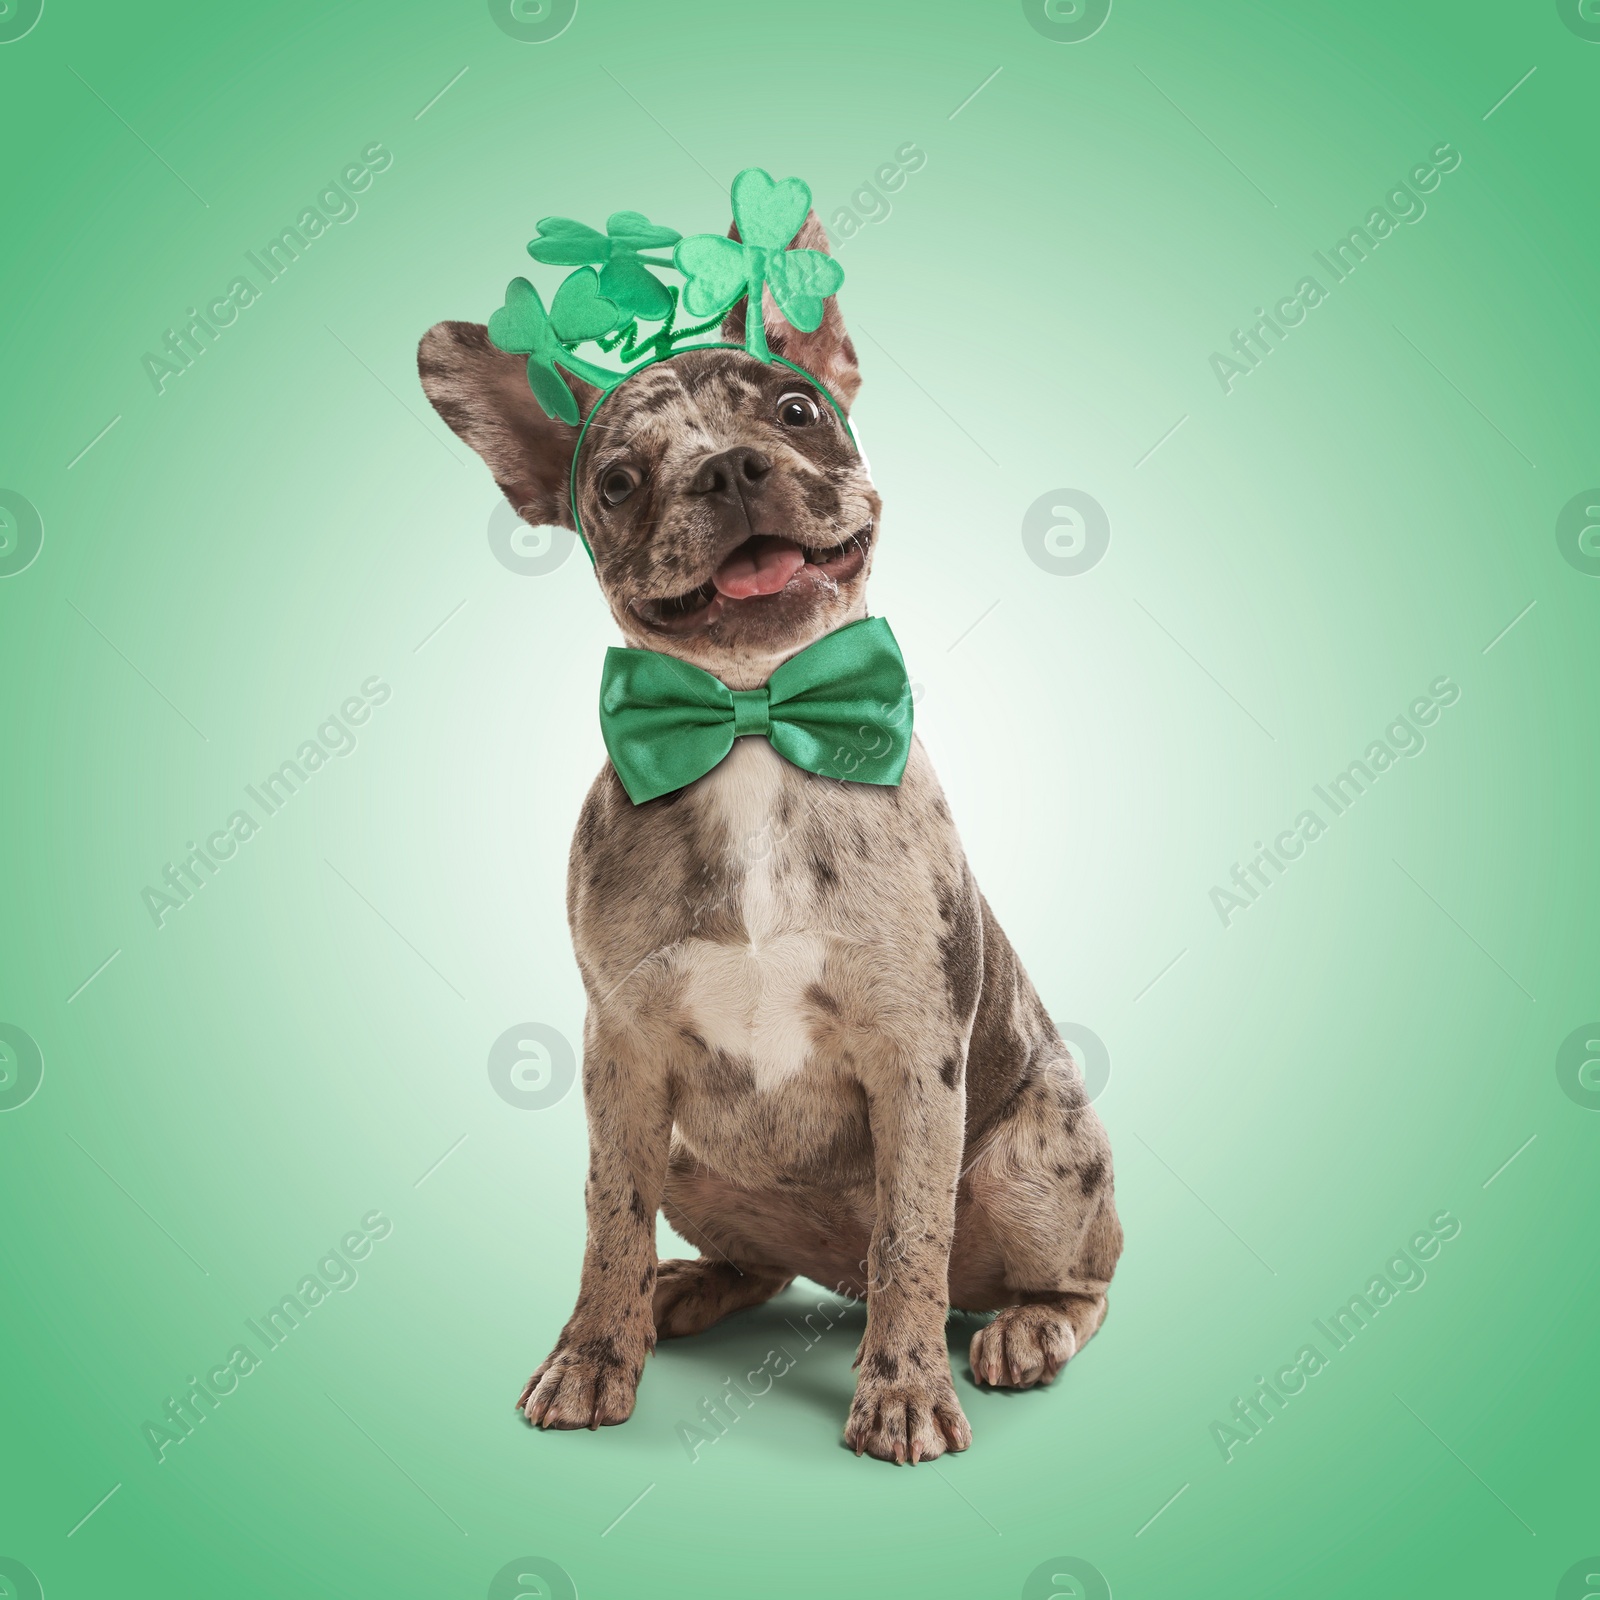 Image of St. Patrick's day celebration. Cute French Bulldog wearing headband with clover leaves and bow tie on green background